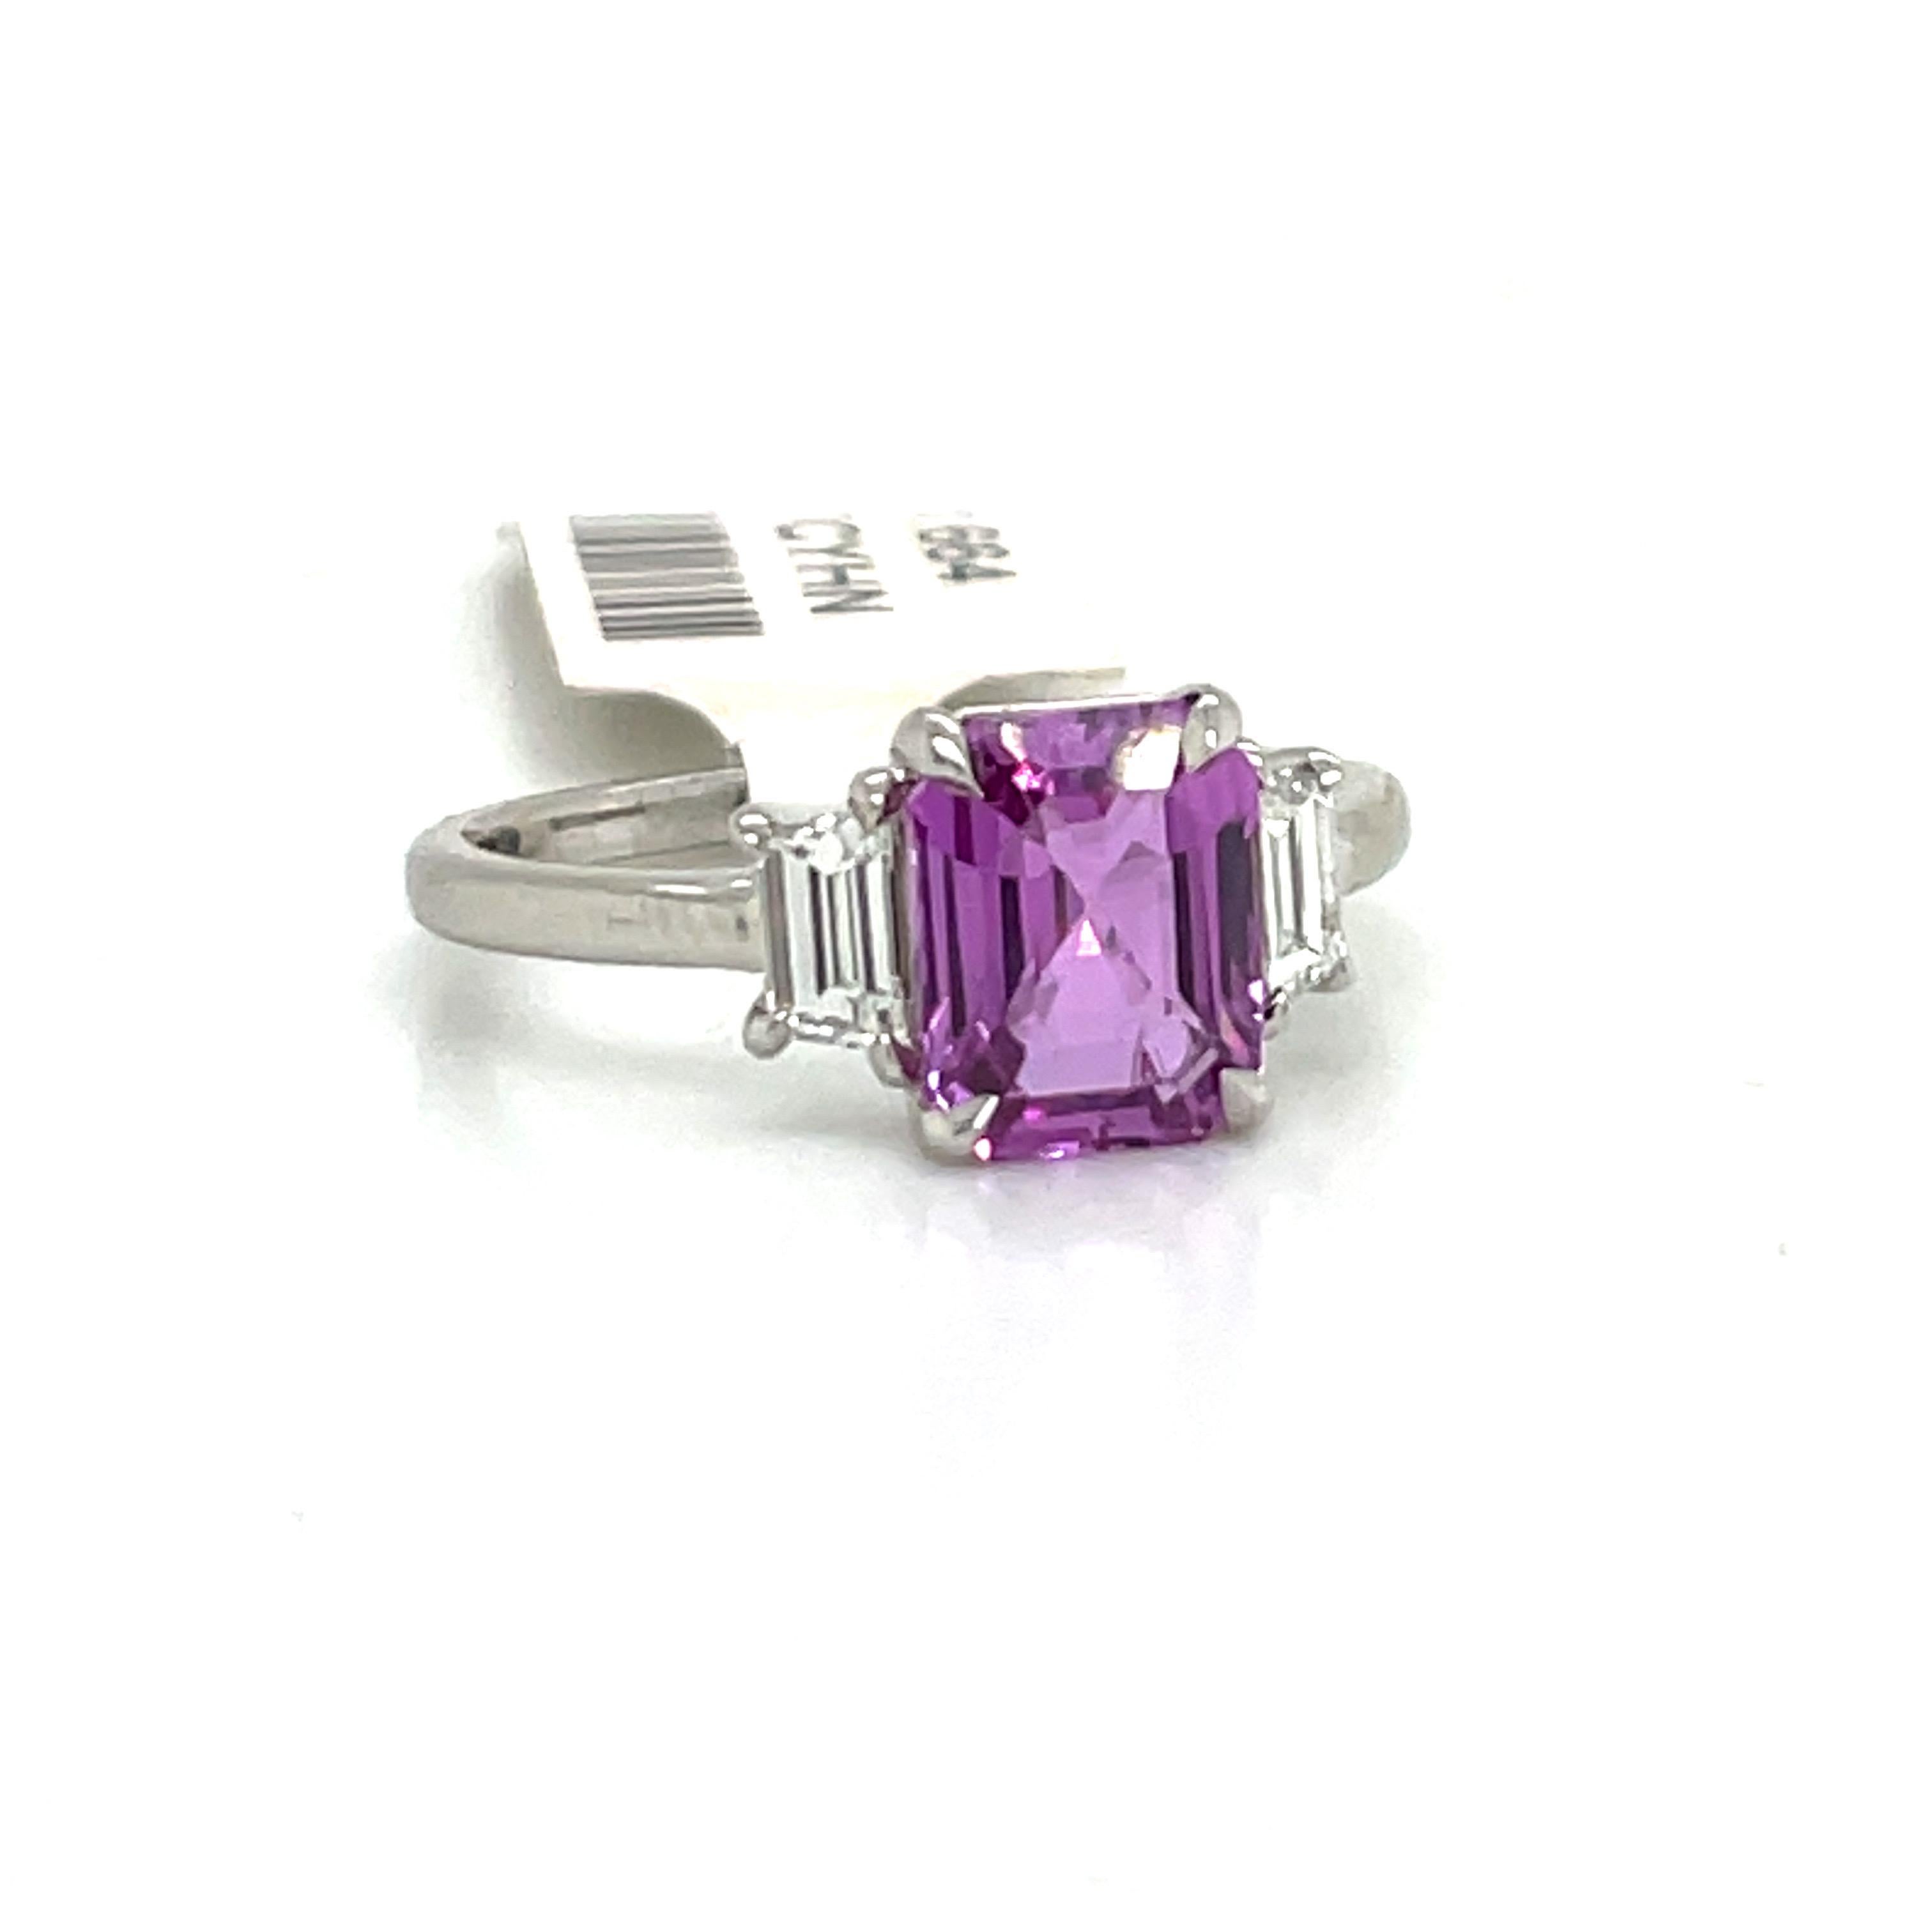 Platinum three stone ring featuring one GIA Certified Emerald Cut Pink-Purple Sapphire No Heat flanked with two Trap diamonds weighing 0.45 Carats. Color H 
Clarity VS1